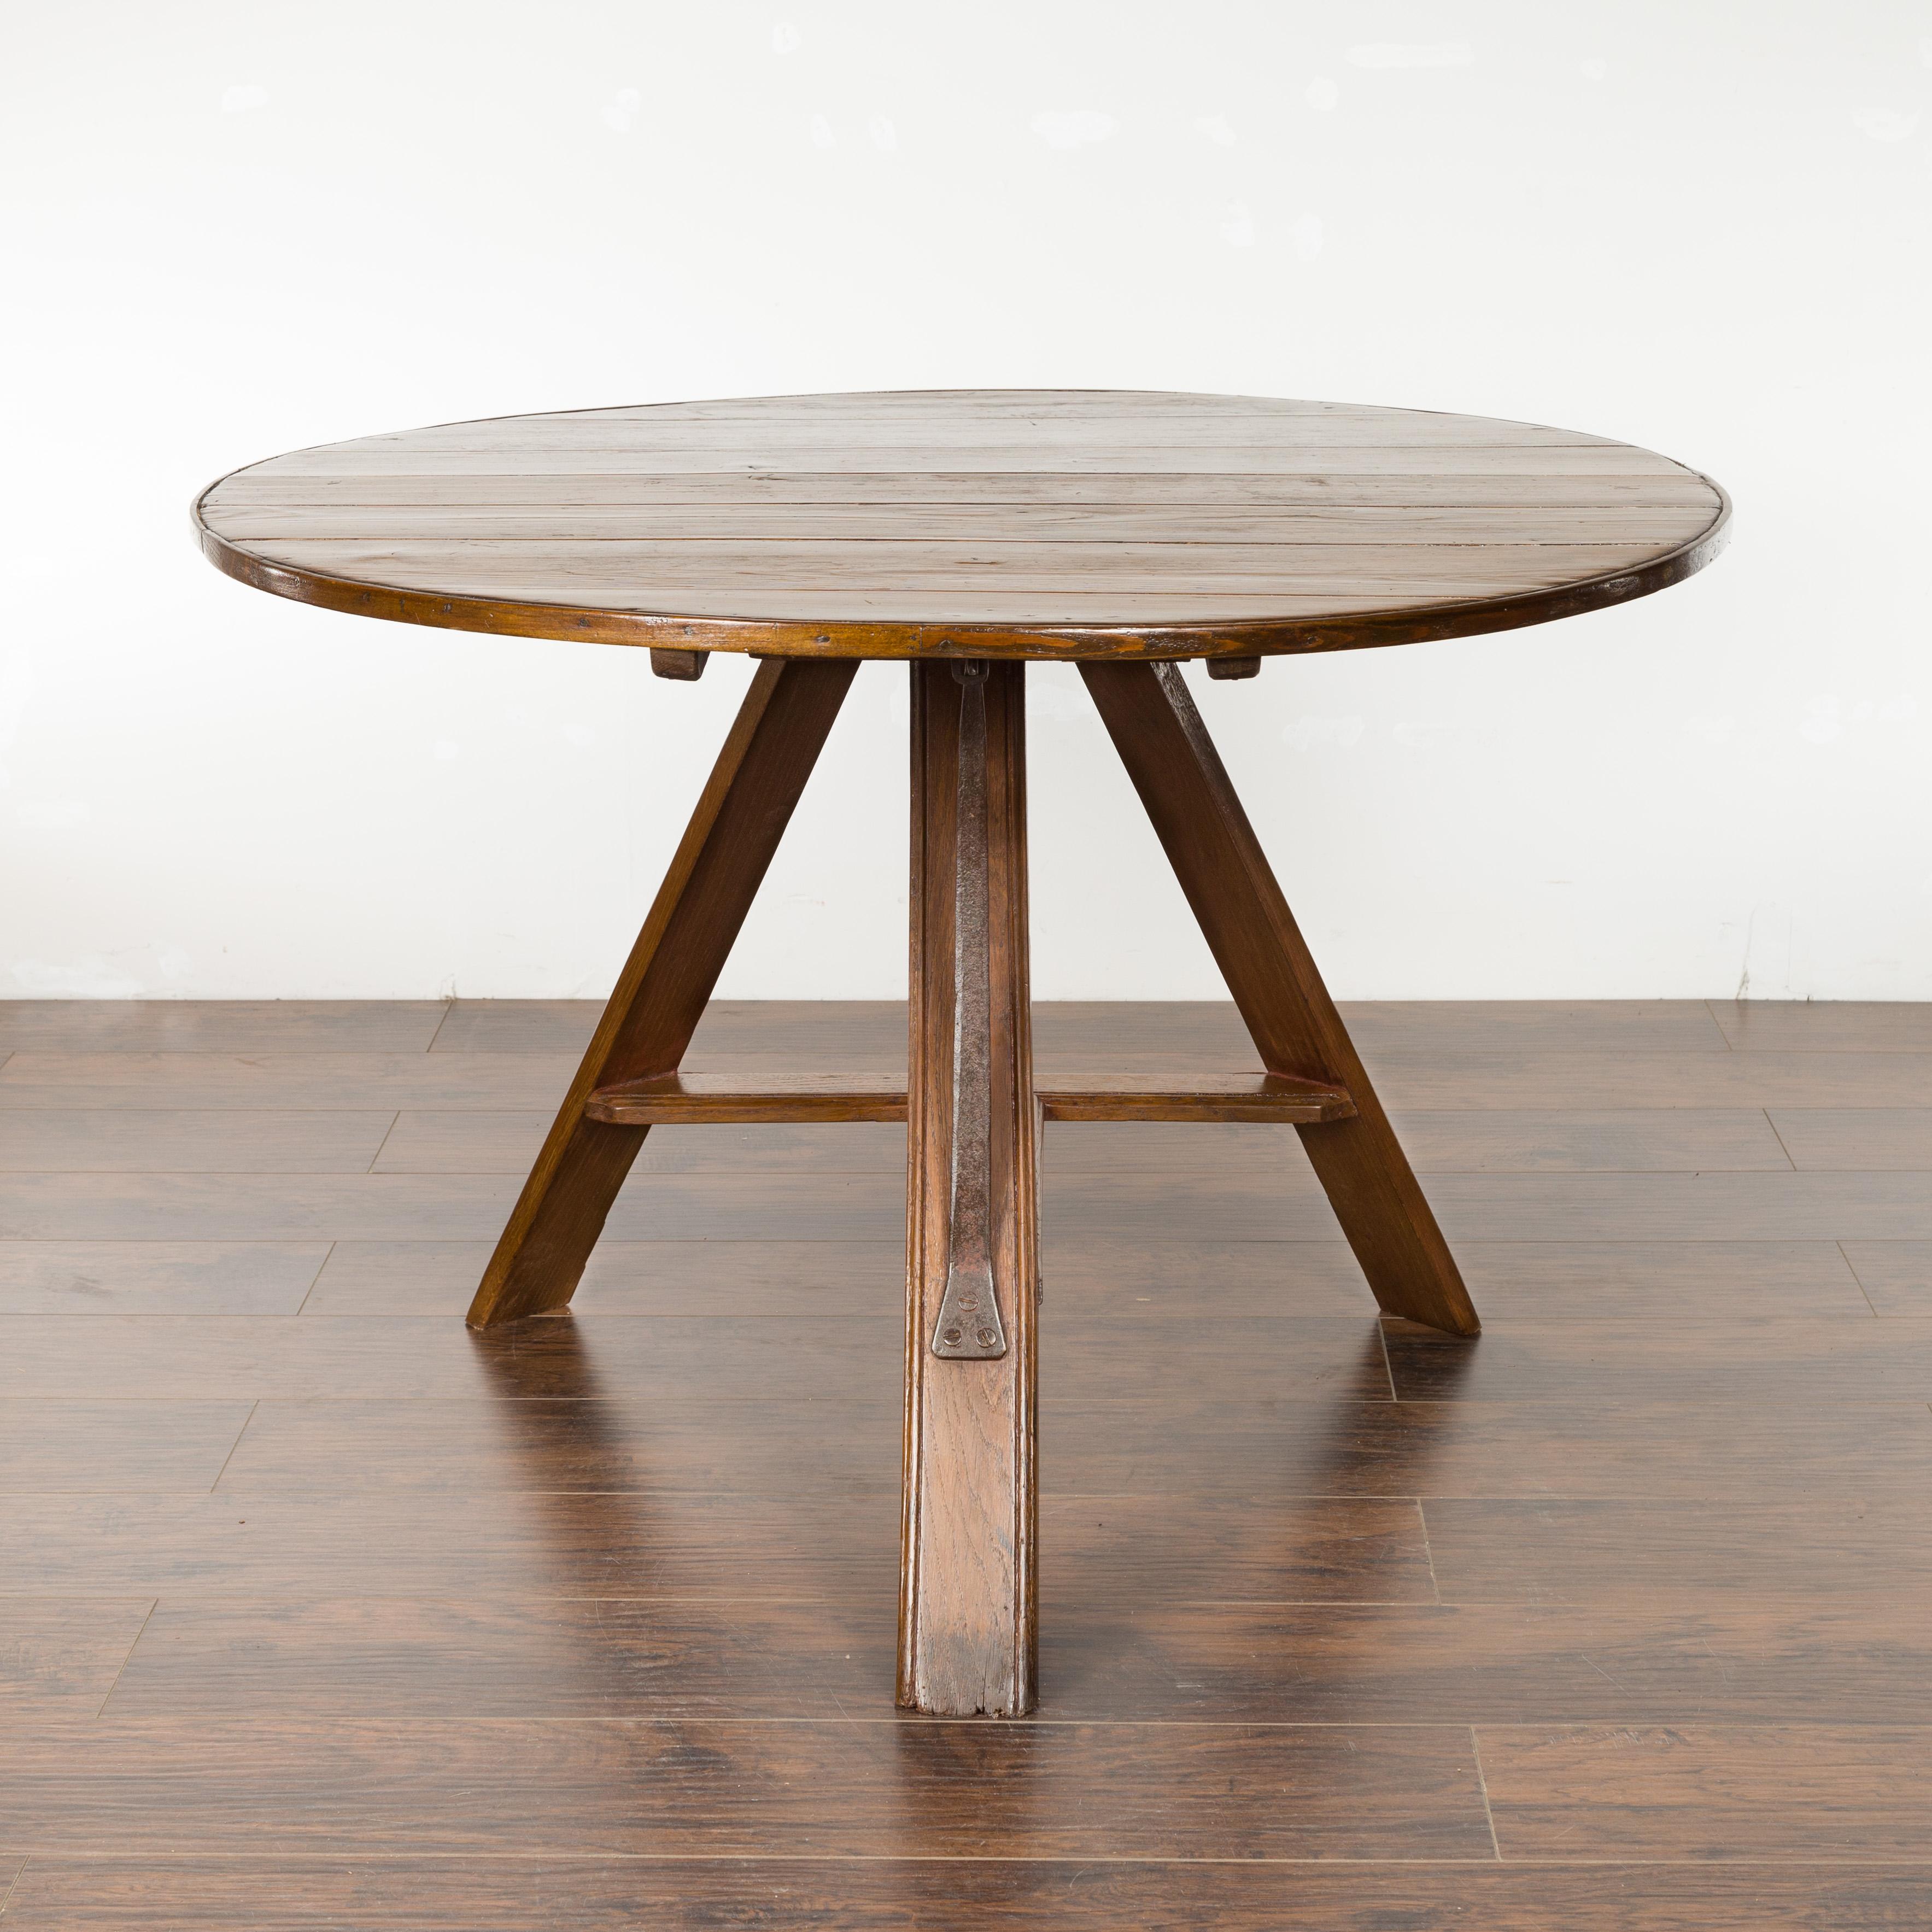 An English pine round tilt-top wine tasting table from the late 19th century, with metal strap. Created in England during the last quarter of the 19th century, this pine table features a circular tilt top resting above a tripod base made of three